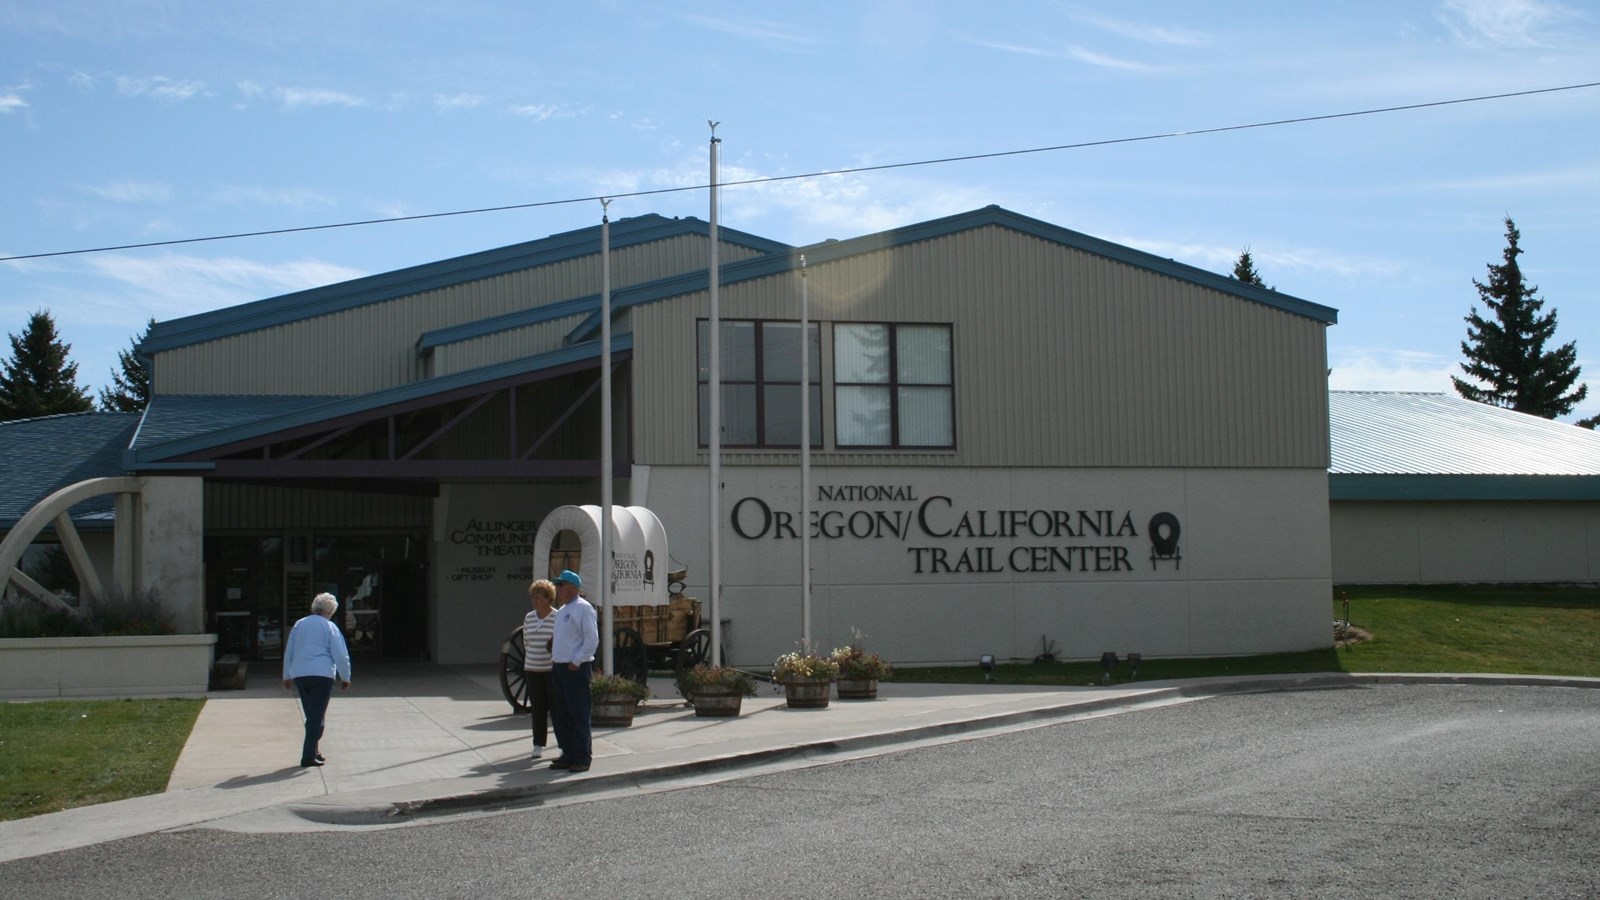 The outside of the National Oregon/California Trail Center in Montpelier, Idaho